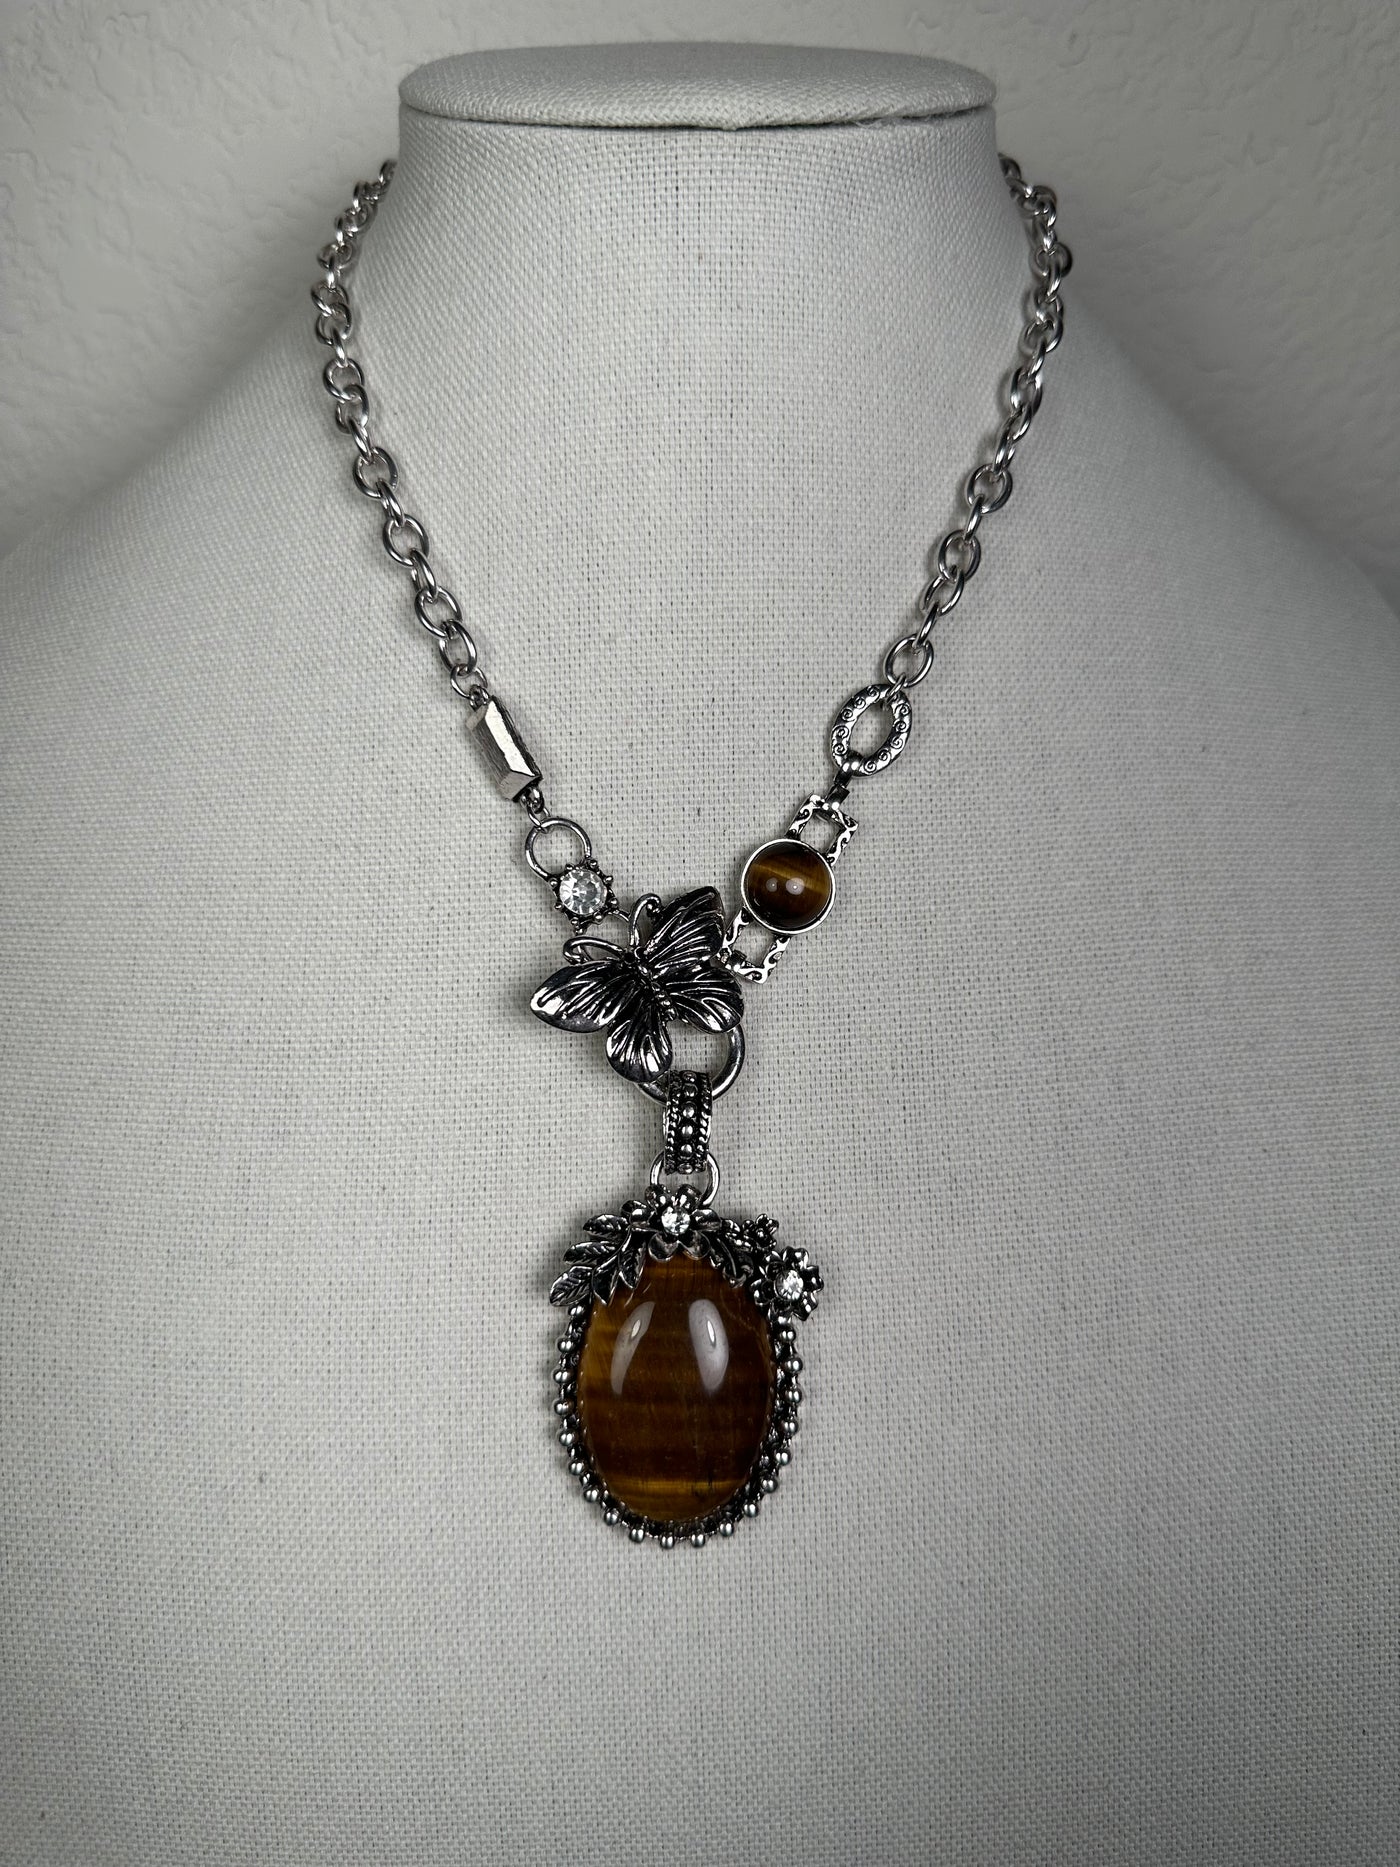 Silver Tone Necklace with an Ornate Oval Howlite Tiger Eye Drop